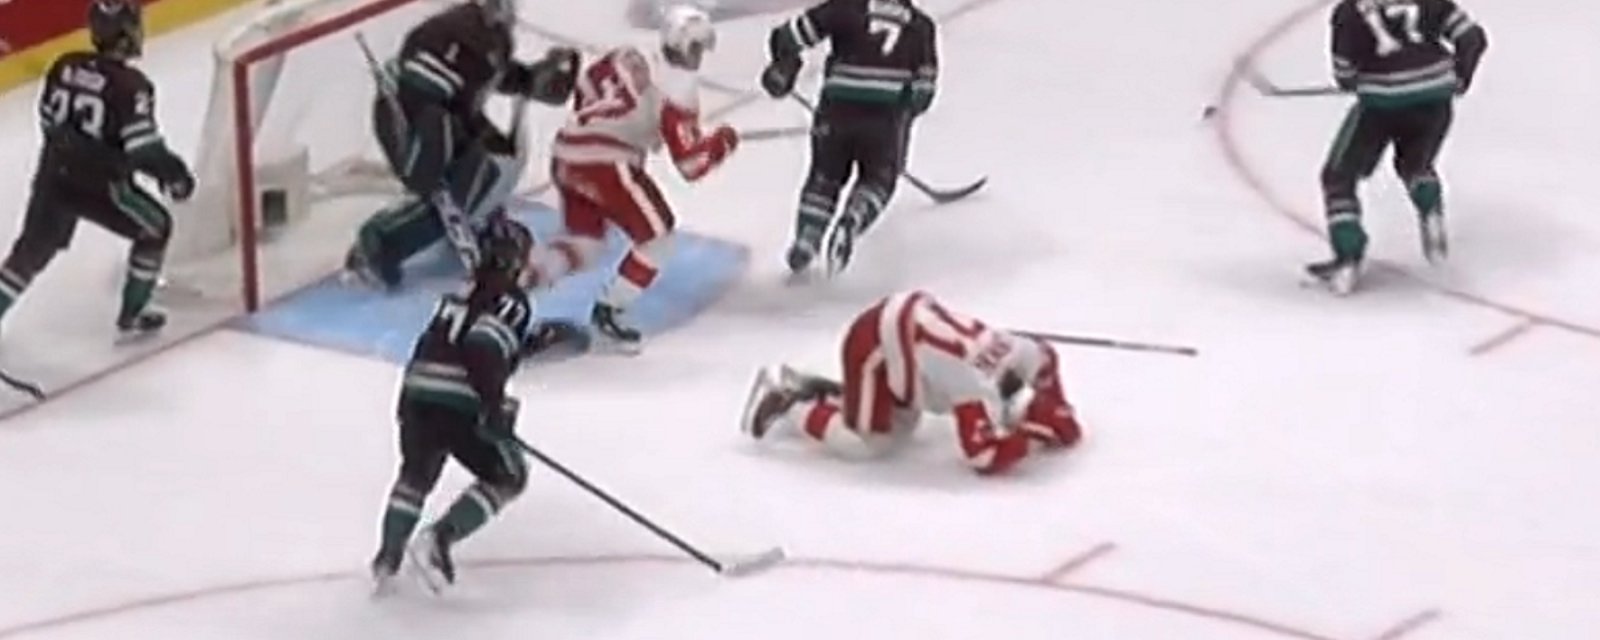 Dylan Larkin injured after a cross check to the back.